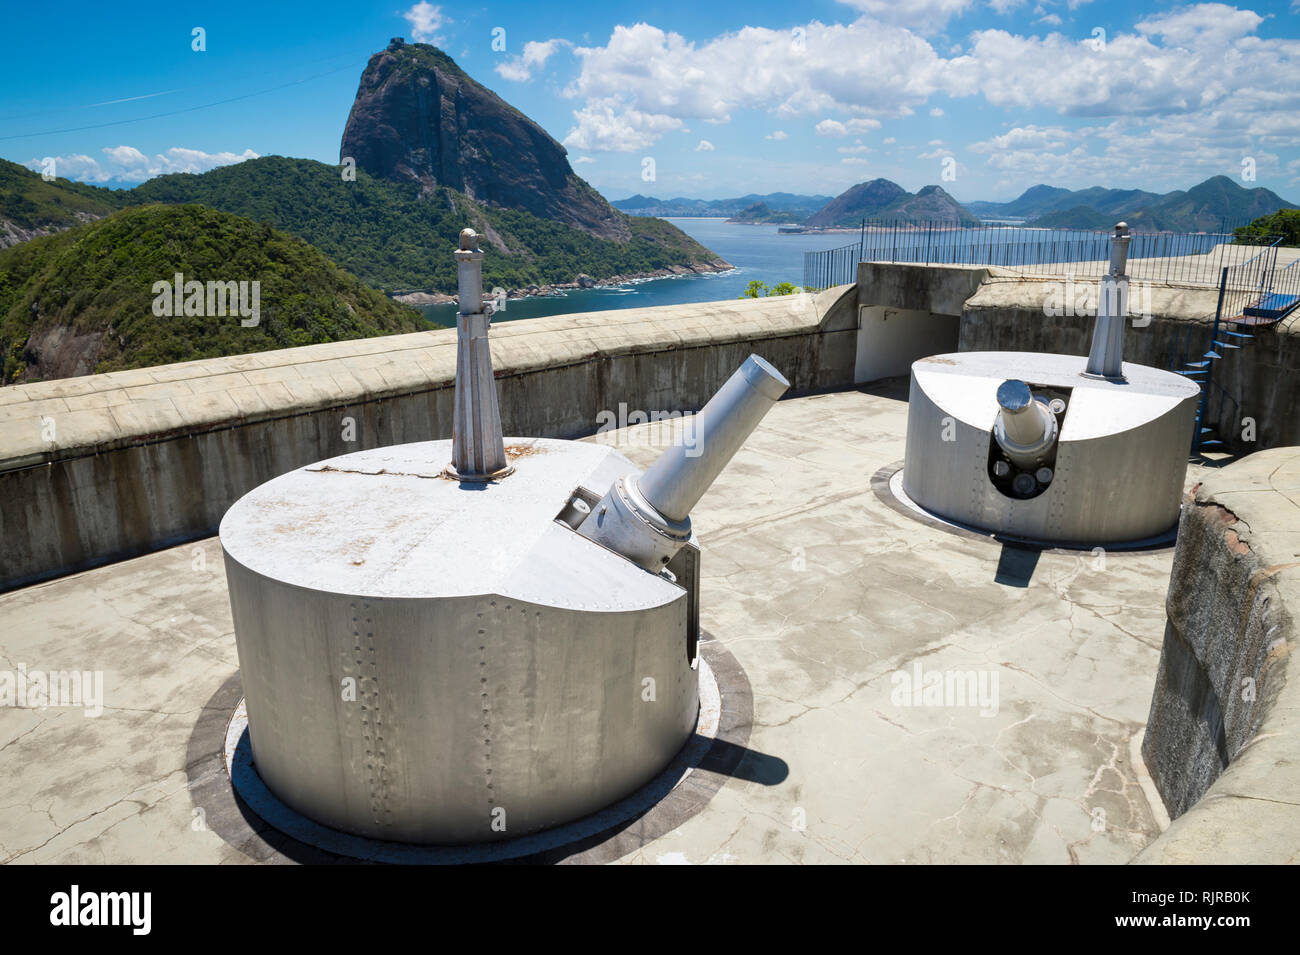 Bright scenic overlook of Sugarloaf Mountain and the Bahia de Guanabara  with decommissioned artillery guns in the foreground in Rio de Janeiro Brazil Stock Photo